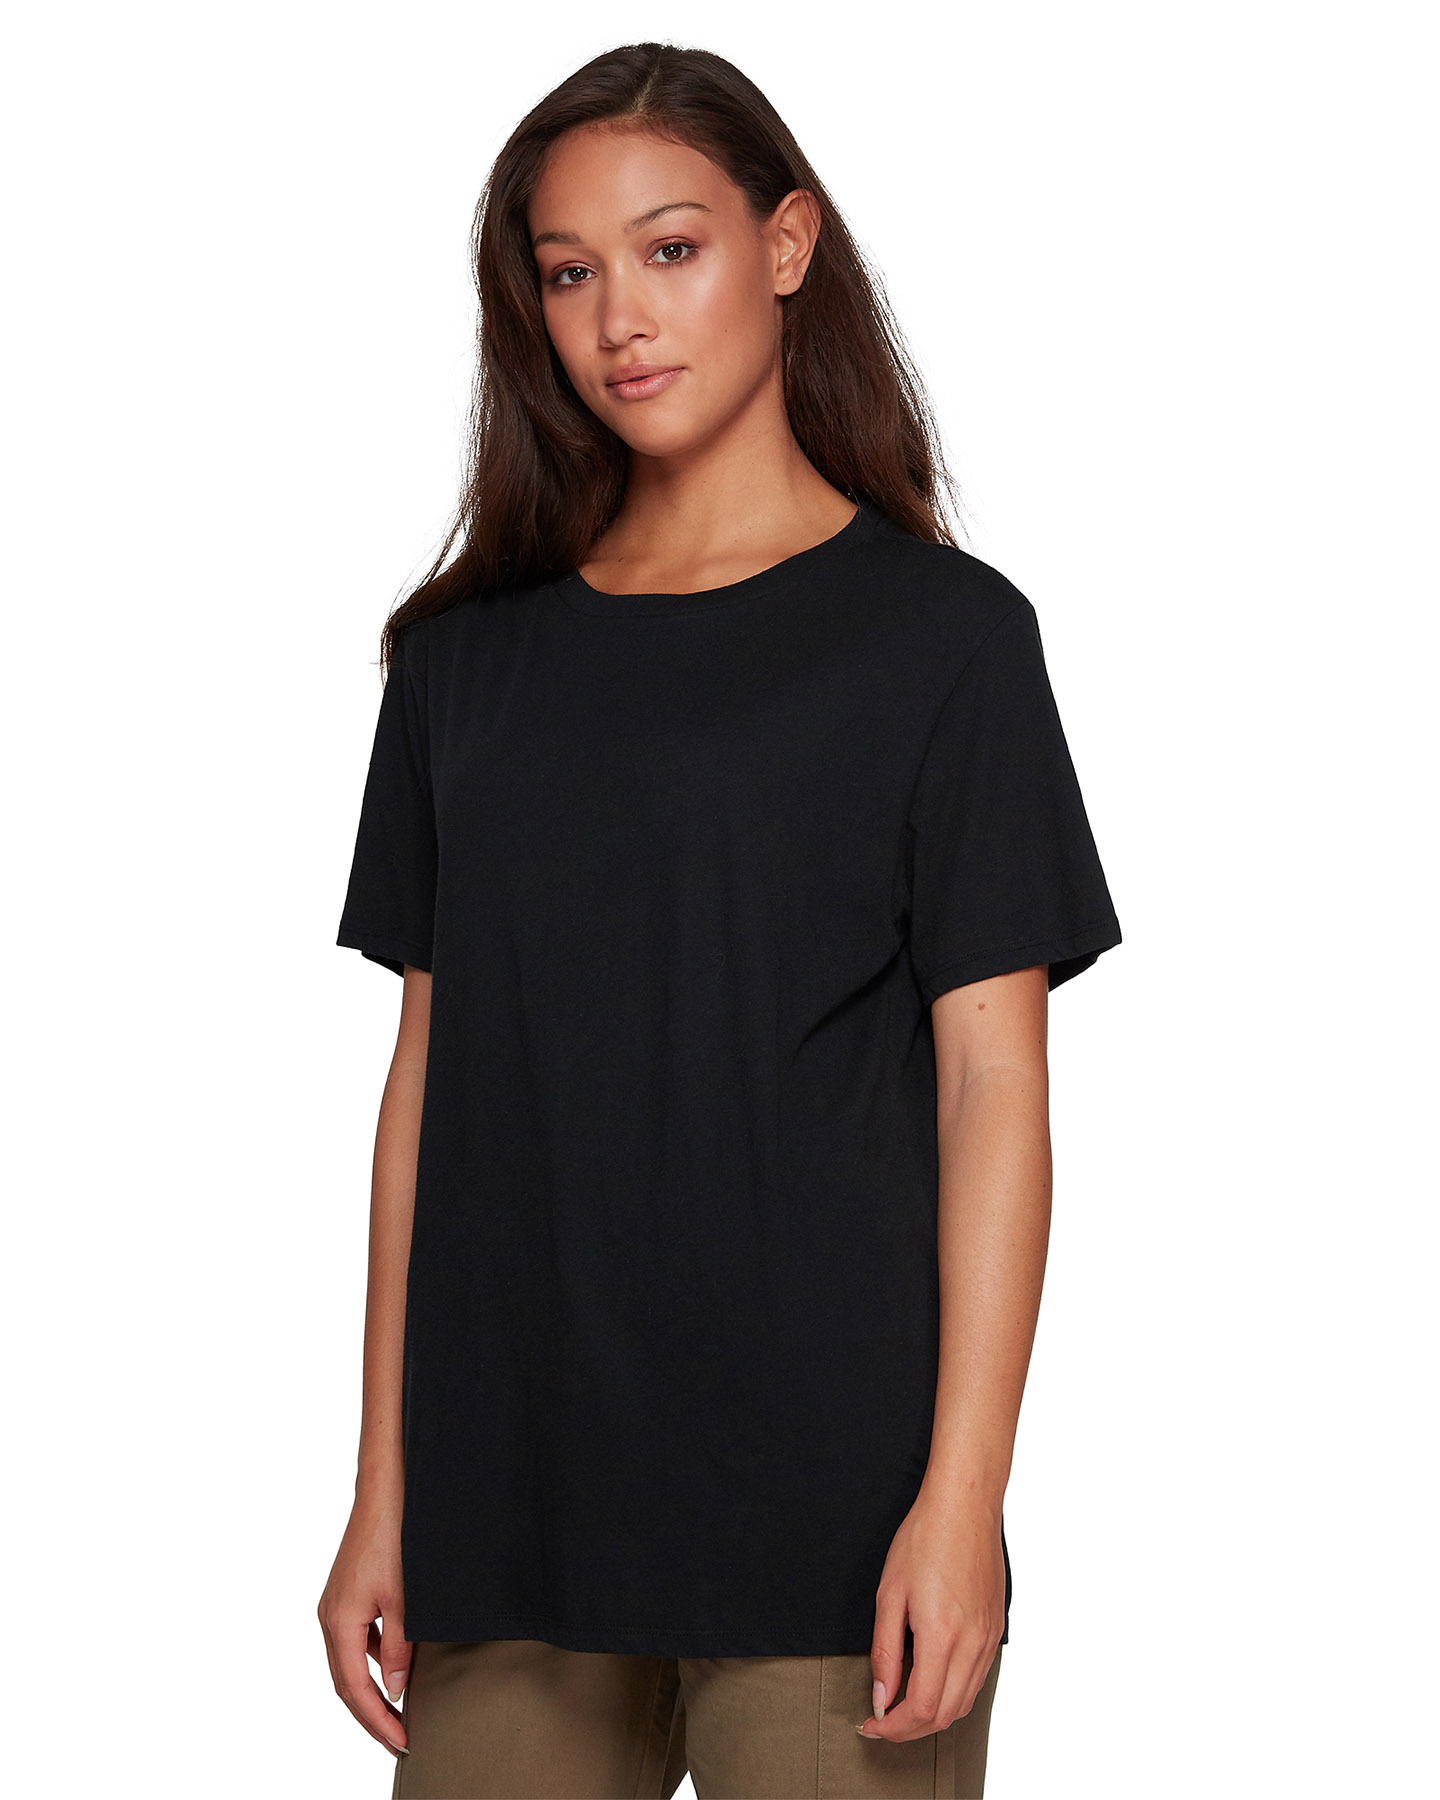 Rvca Faces Tee - Black | SurfStitch